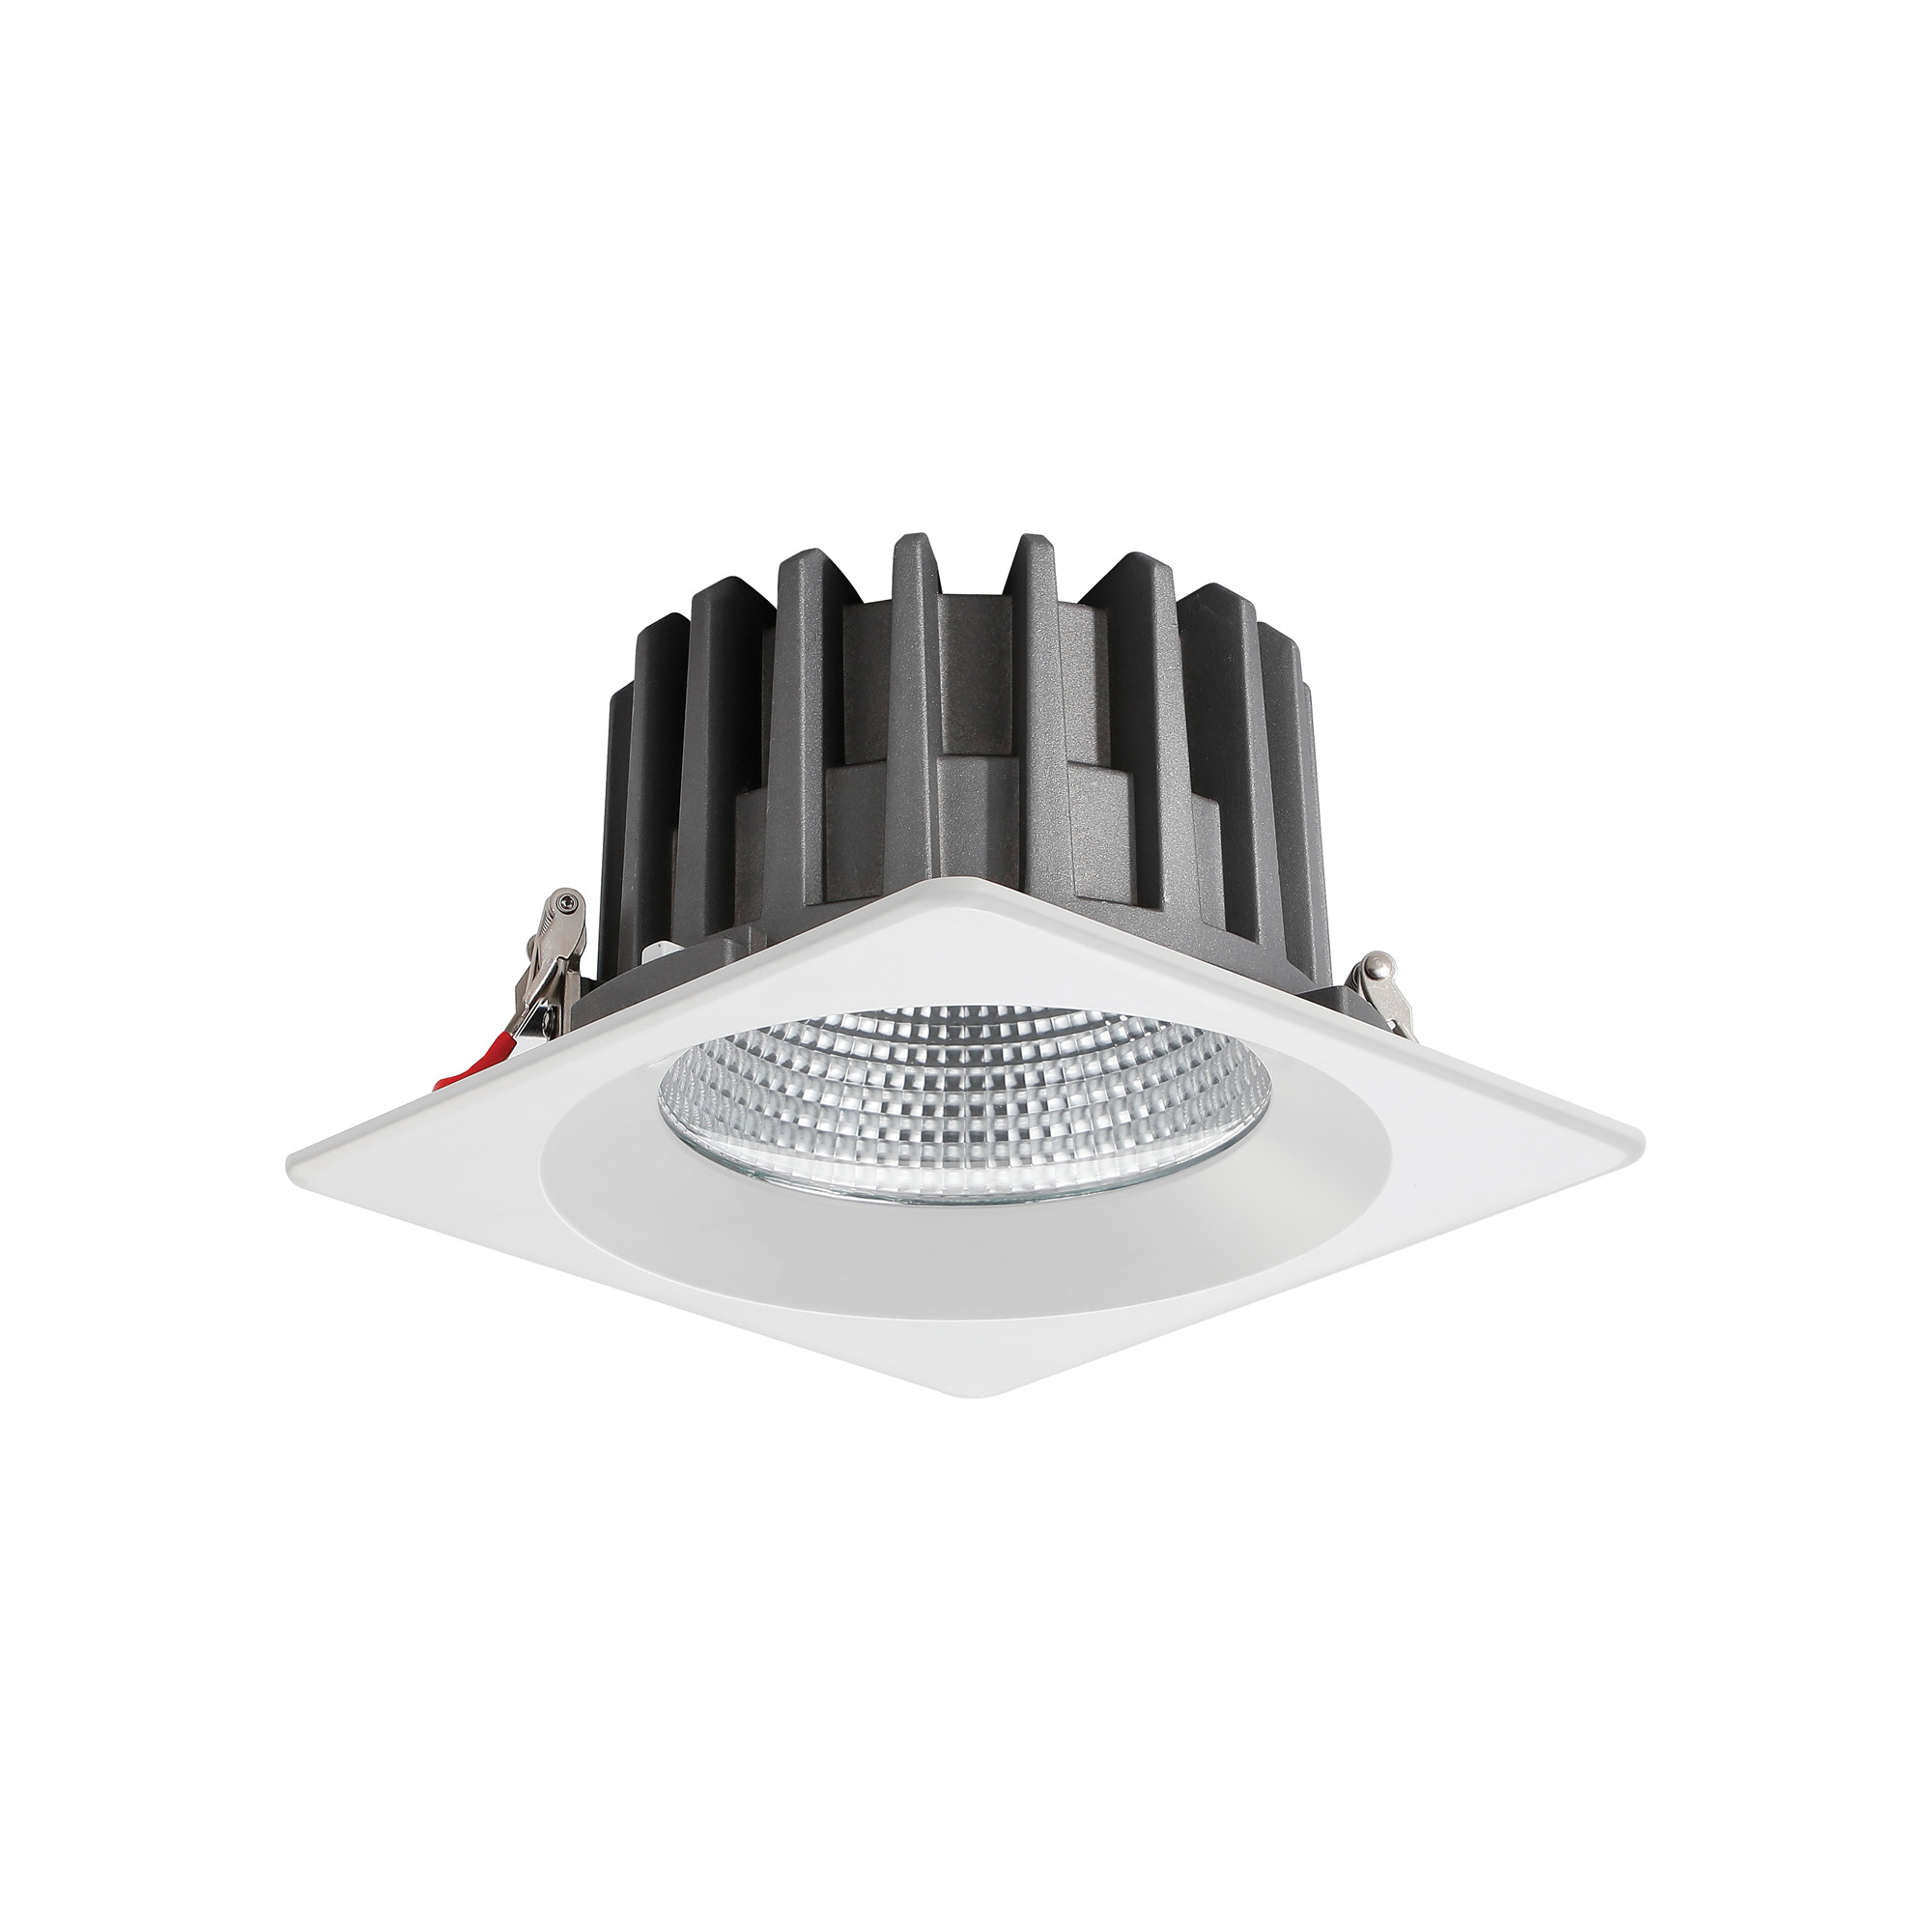 DL200079  Bionic 40, 40W, 1000mA, White Deep Square Recessed Downlight, 3463lm ,Cut Out 175mm, 40° , 3000K, IP44, DRIVER INC., 5yrs Warranty.